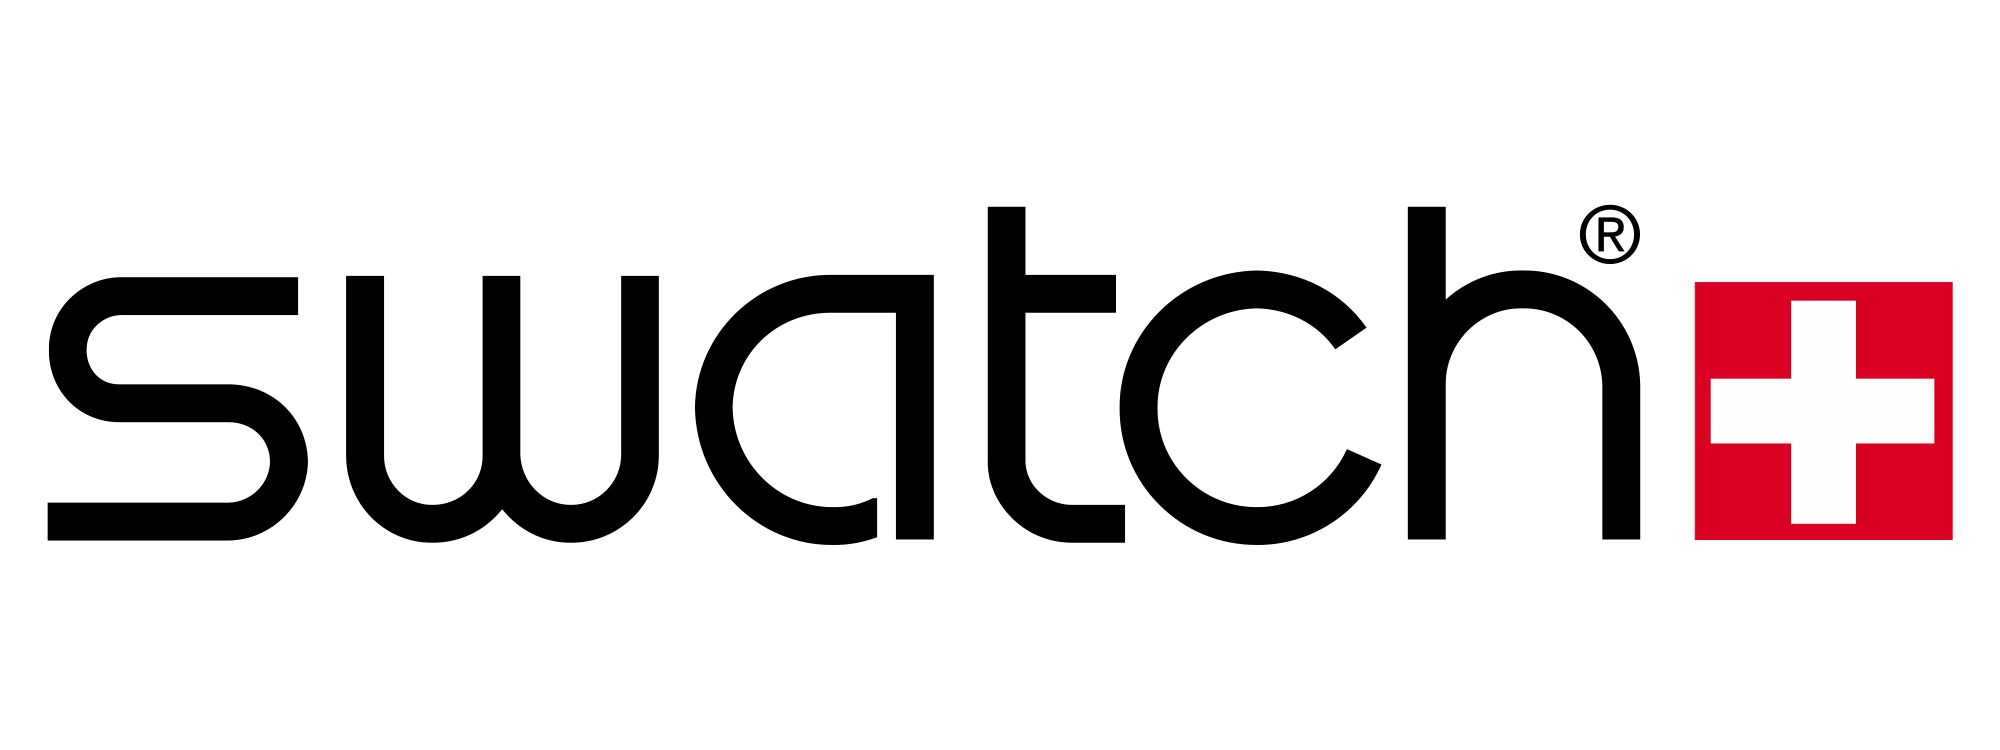 Swatch Logo - Swatch Logo, Swatch Symbol, Meaning, History and Evolution